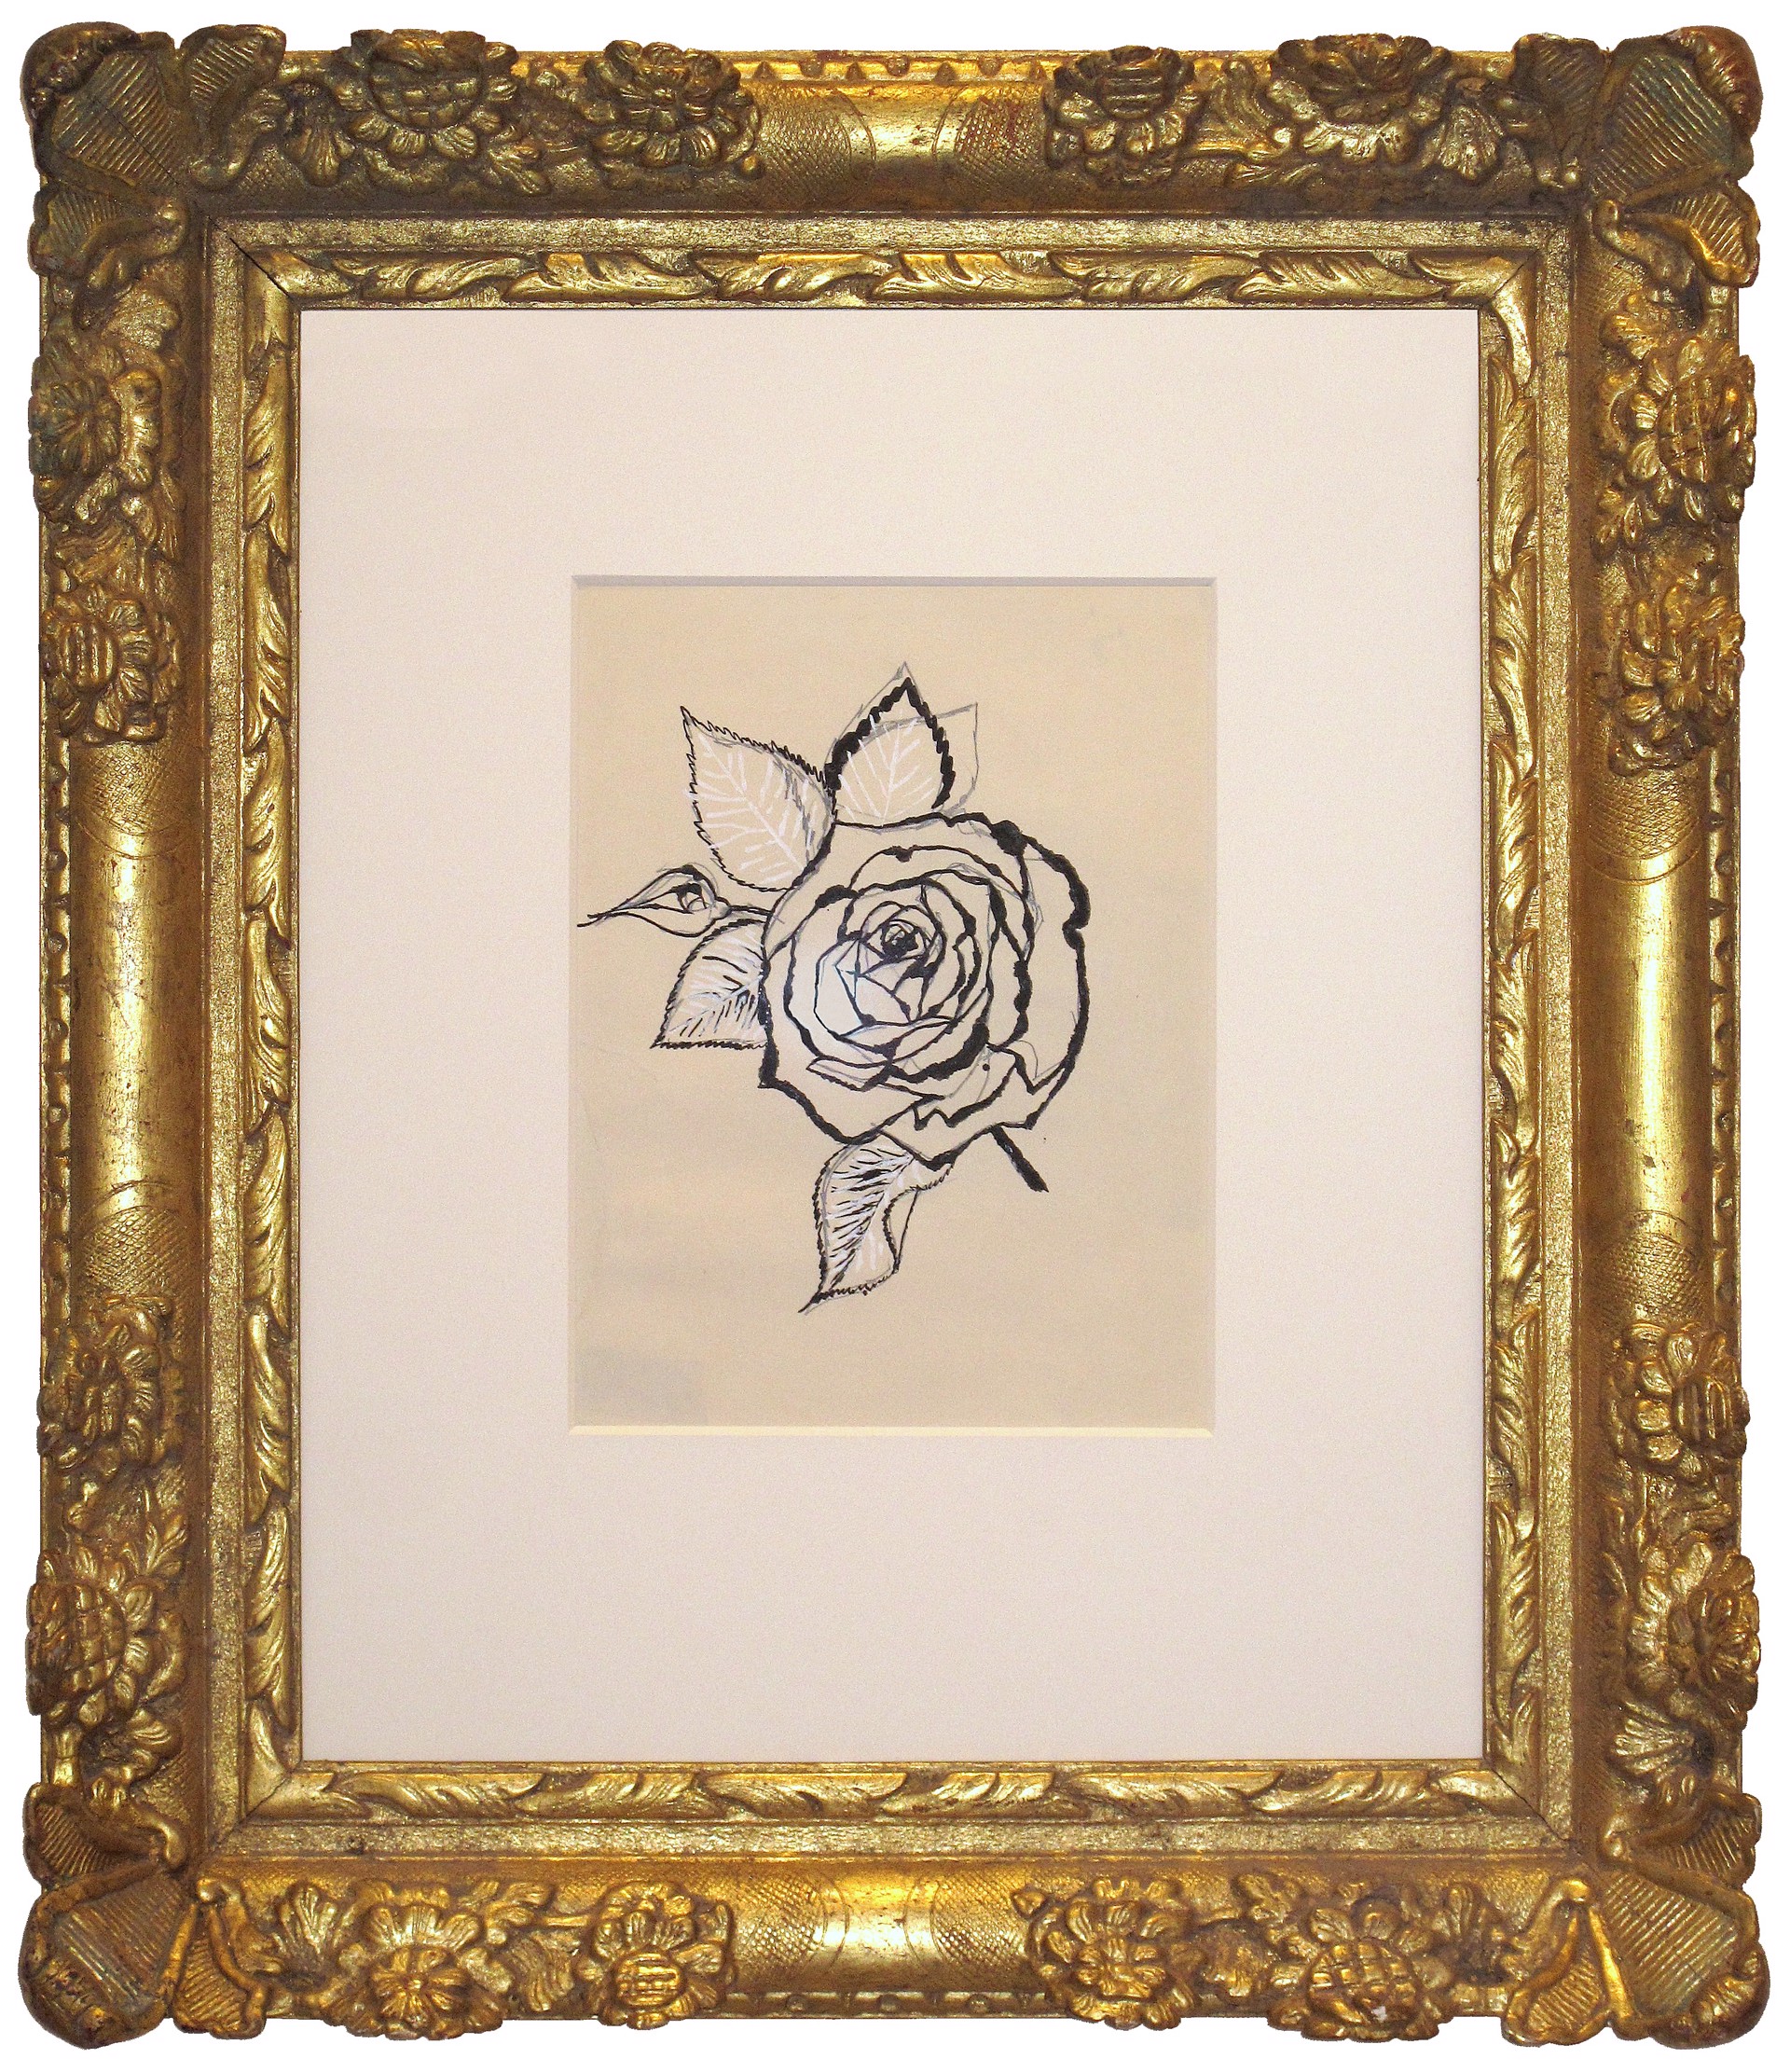 Rose by Andy Warhol